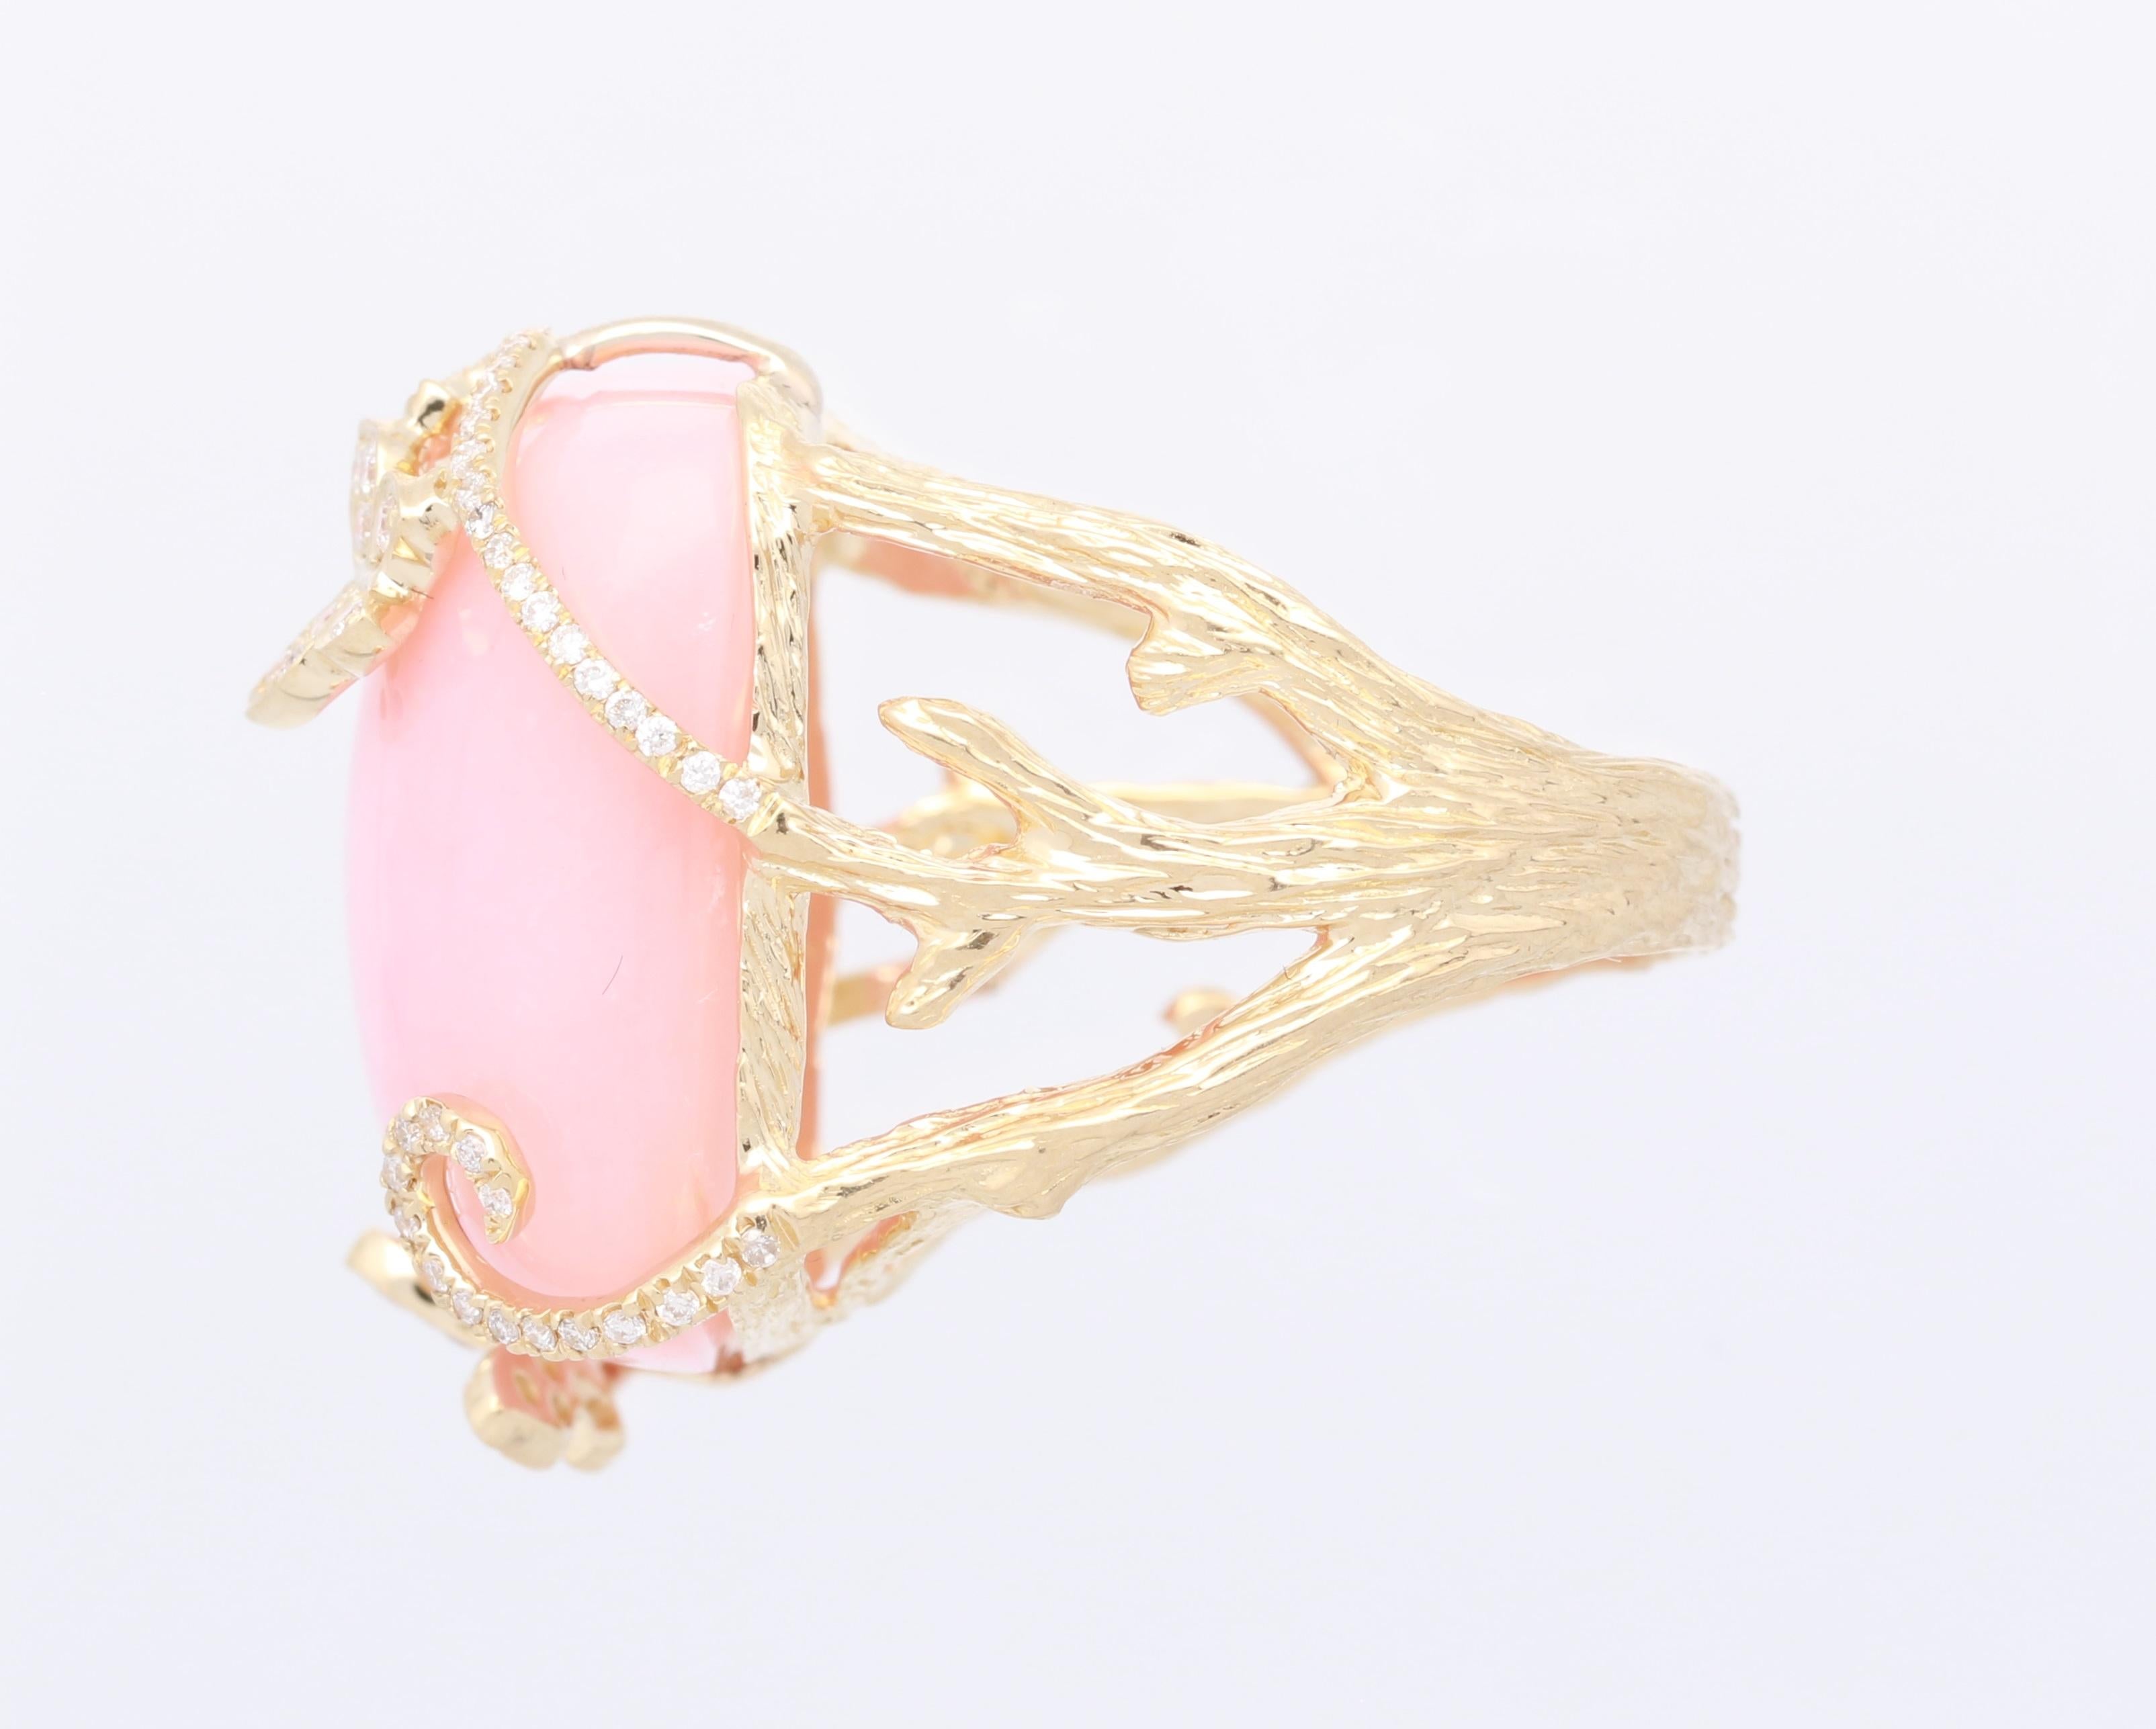 Showcase your unique style with our Cirari pink opal and diamond one of a kind ring crafted of 14k yellow gold. This ring features a cushion shaped 25 1/5 carat Pink opal cut and 1/3 carat of glistening diamonds with a butterfly design that holds